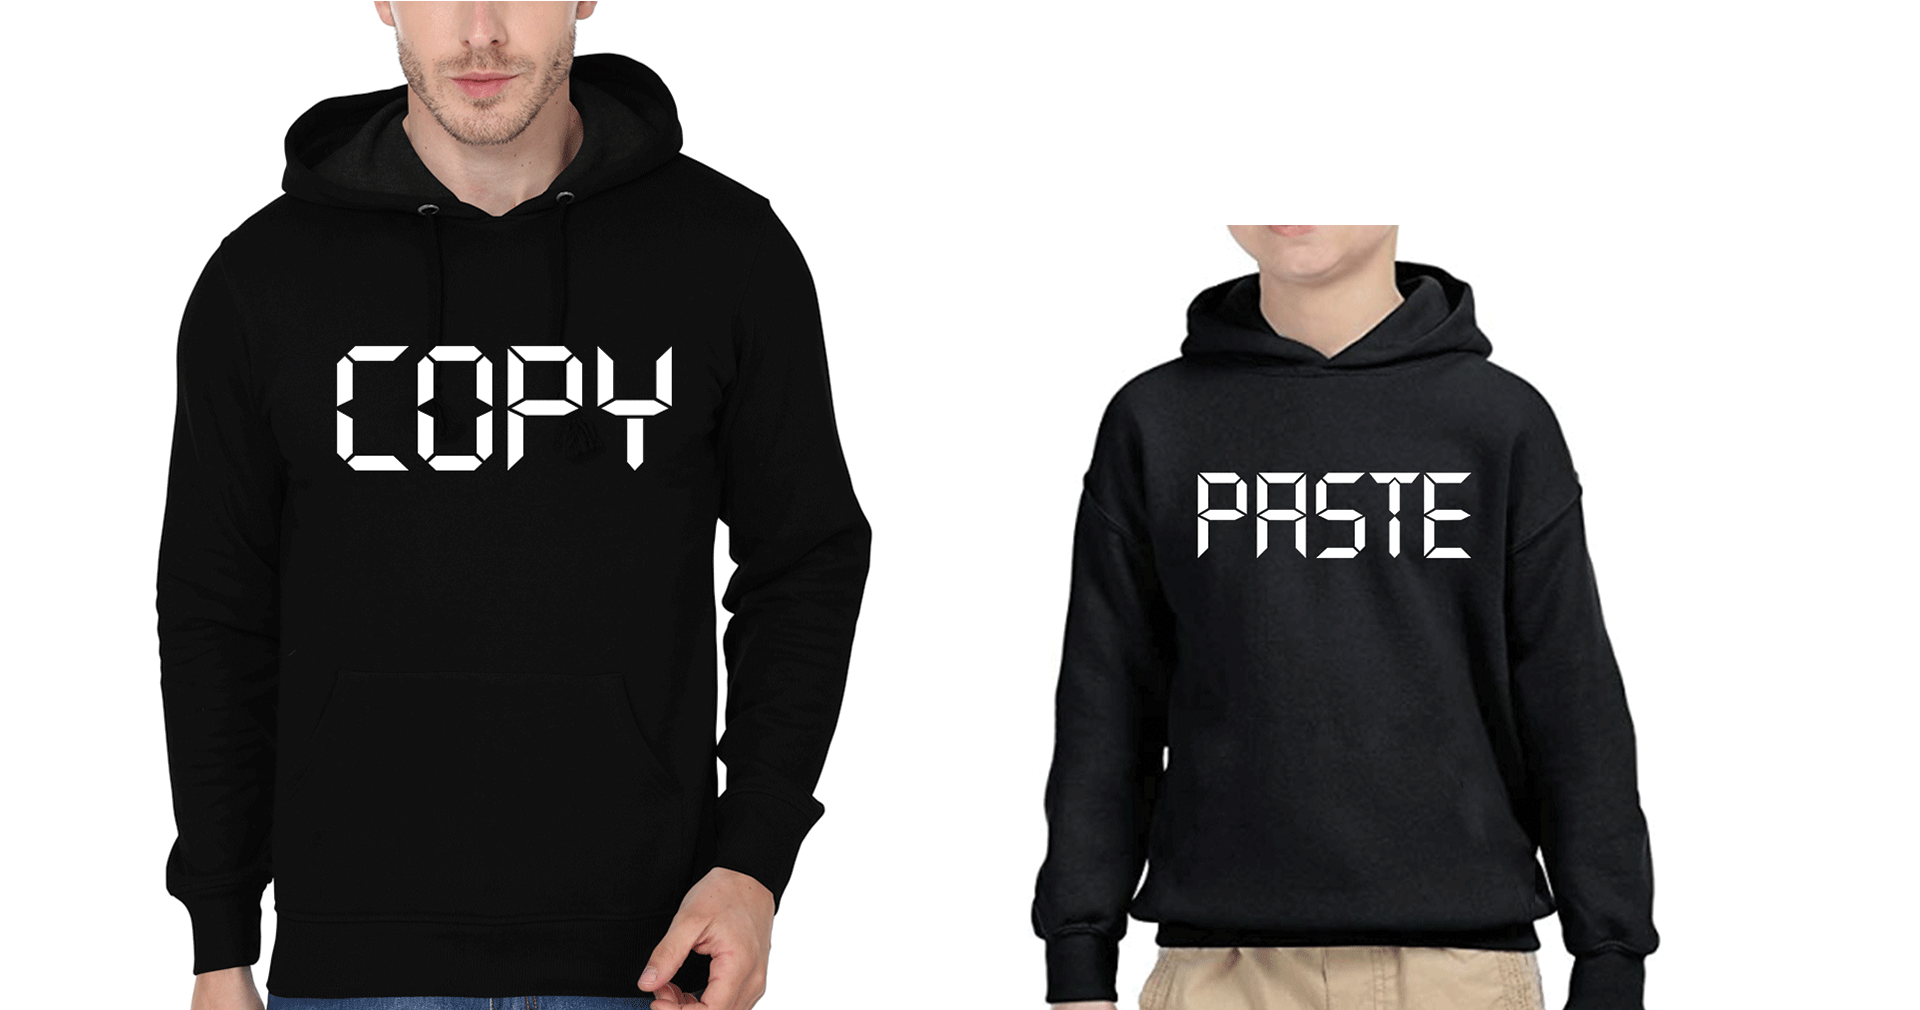 Copy Paste Father and Son Matching Hoodies- FunkyTeesClub